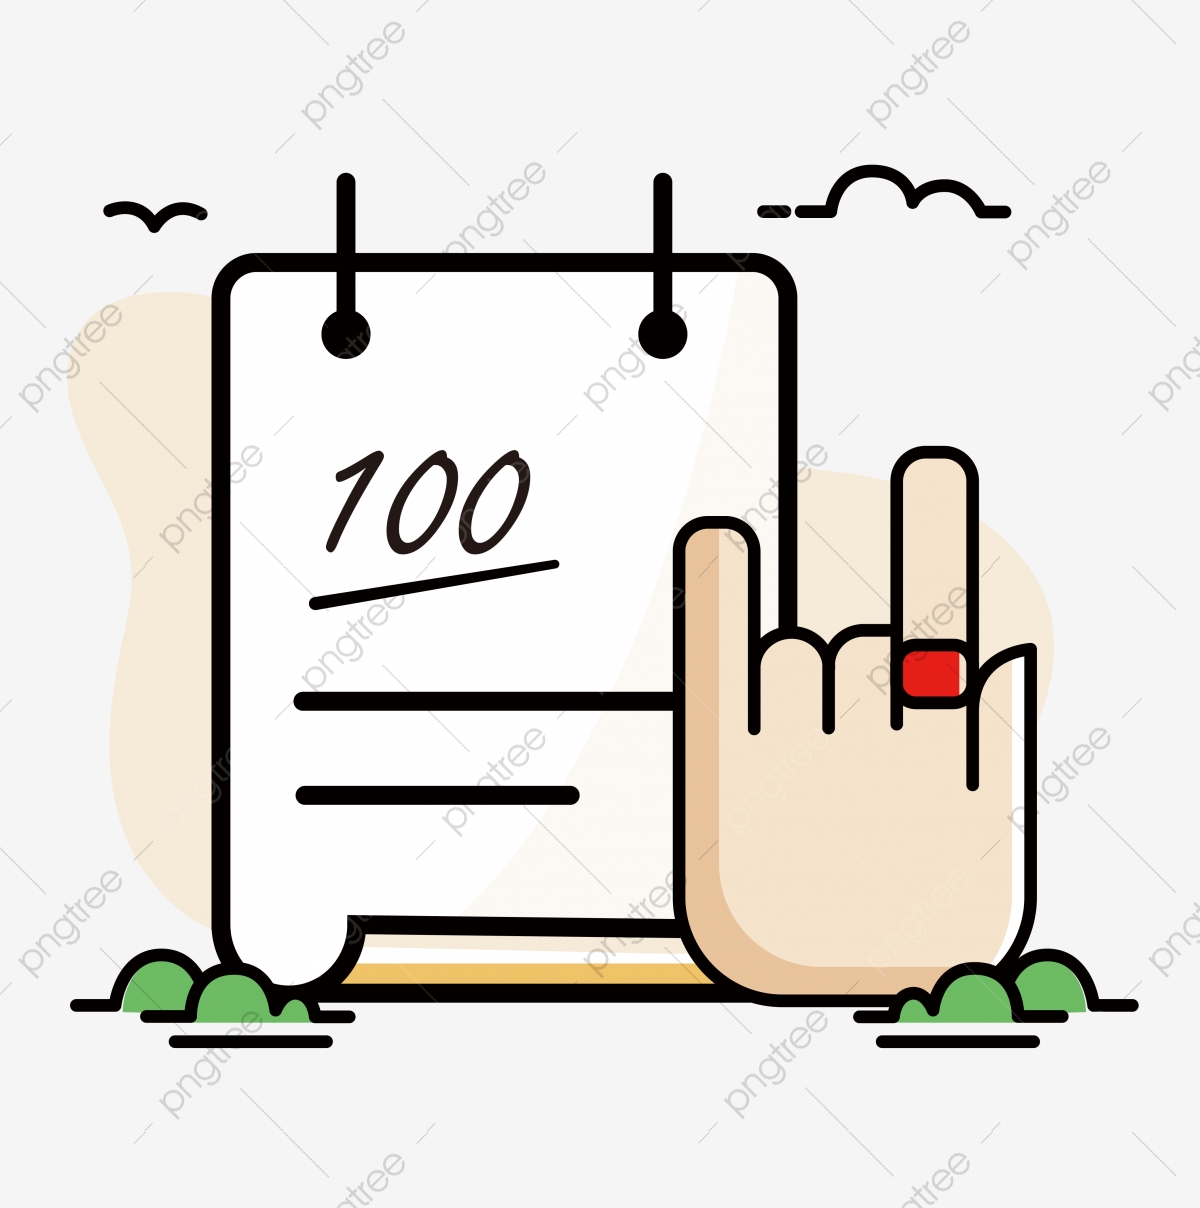 test clipart test papers